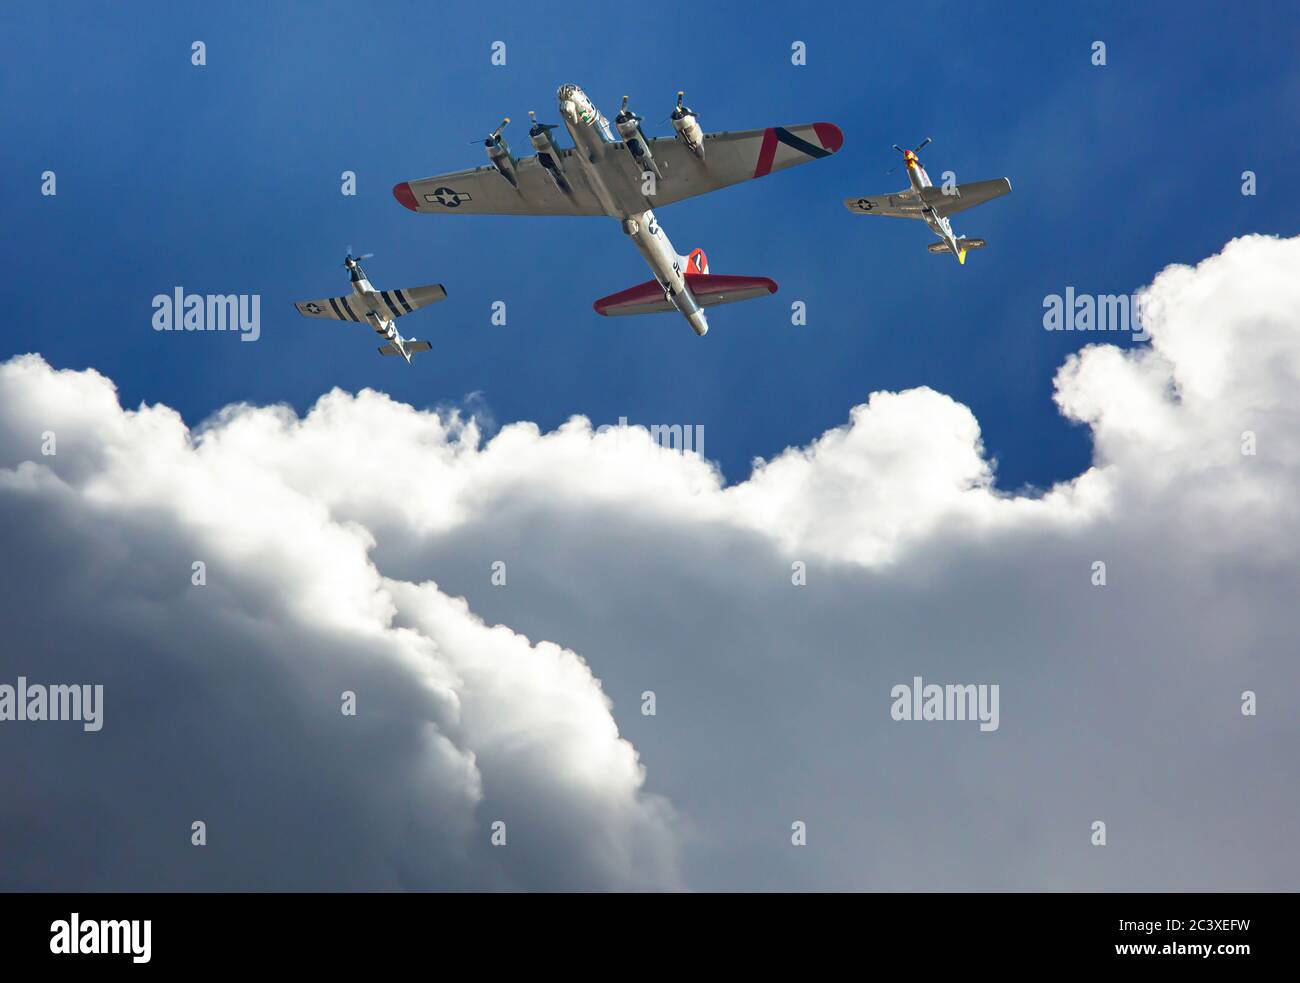 A B-17 'Flying Fortress' bomber is escorted by two P-51 Mustang fighters above dramatic clouds in a deep blue sky. Stock Photo